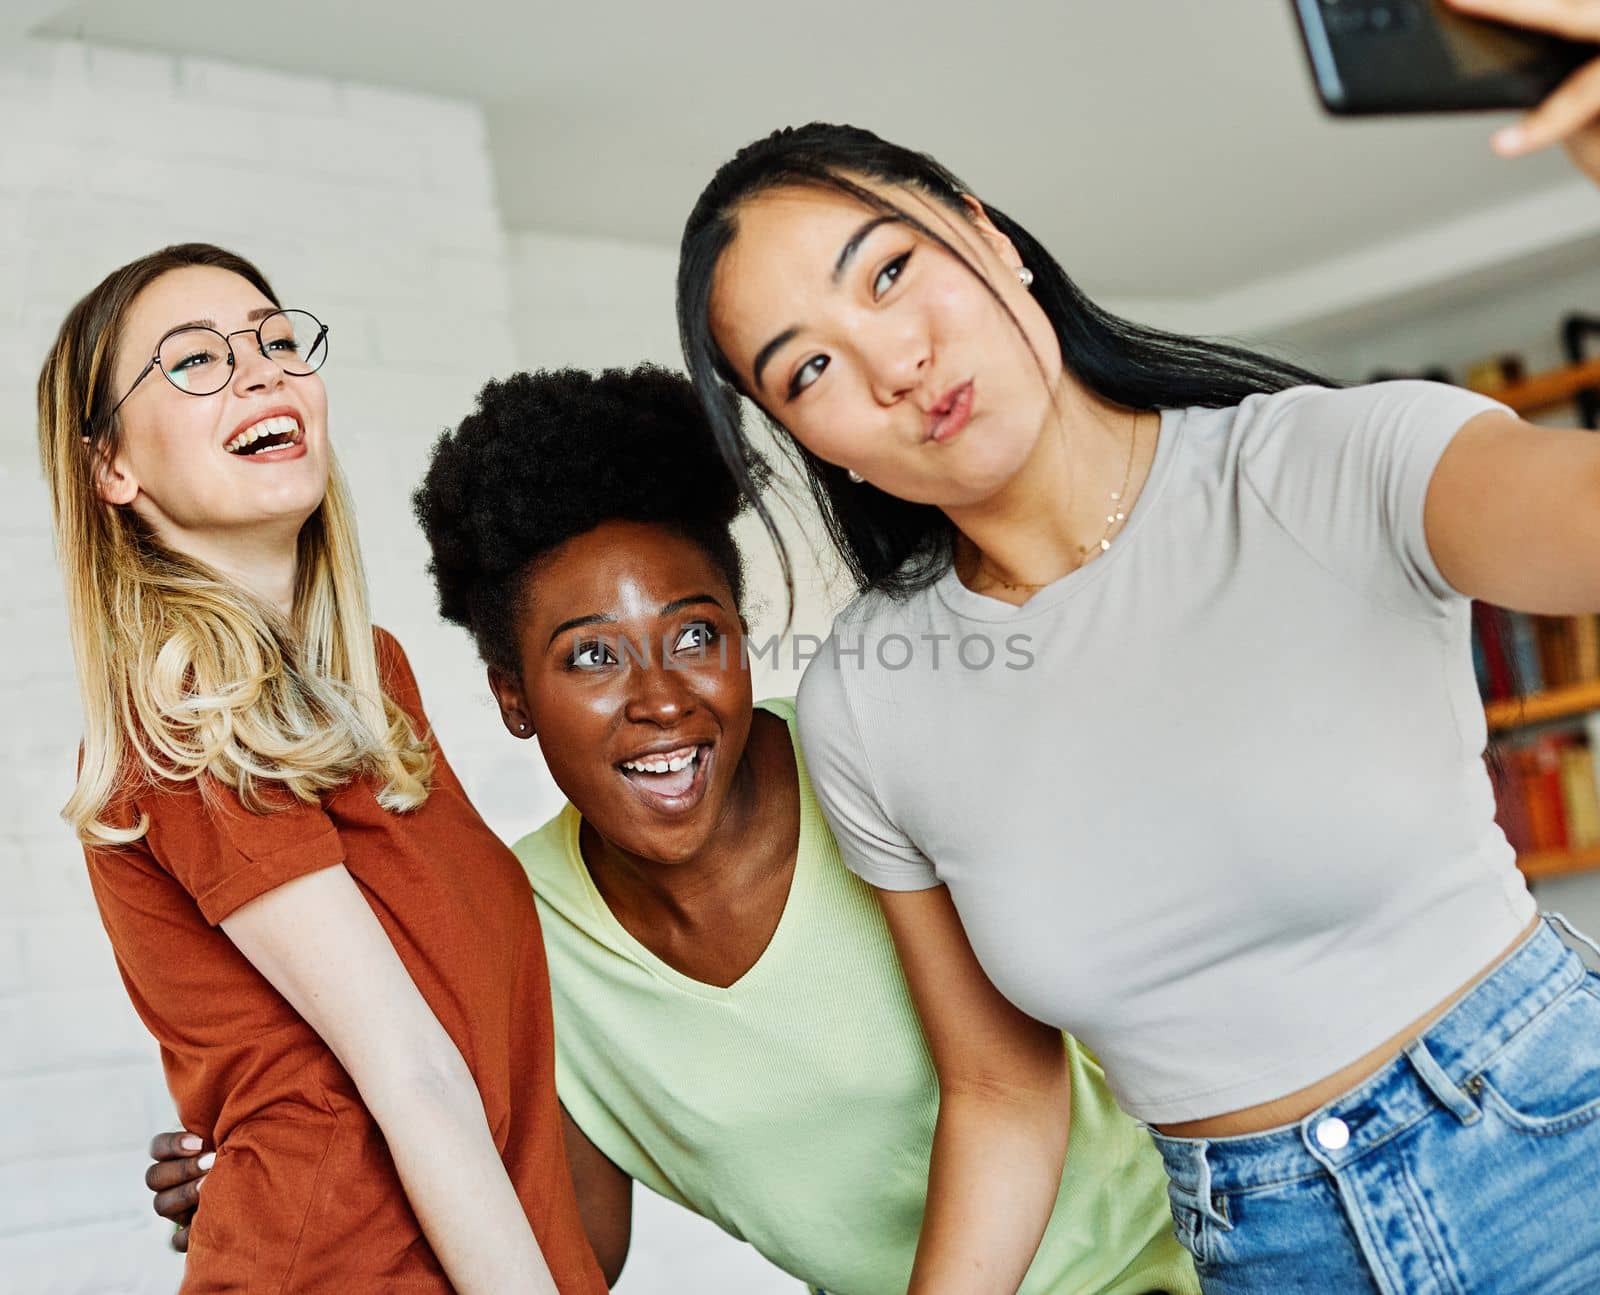 young people adult fun selfie friendship friend happy together group cheerful smiling diversity mixed ethnicity diverse black asian african american by Picsfive